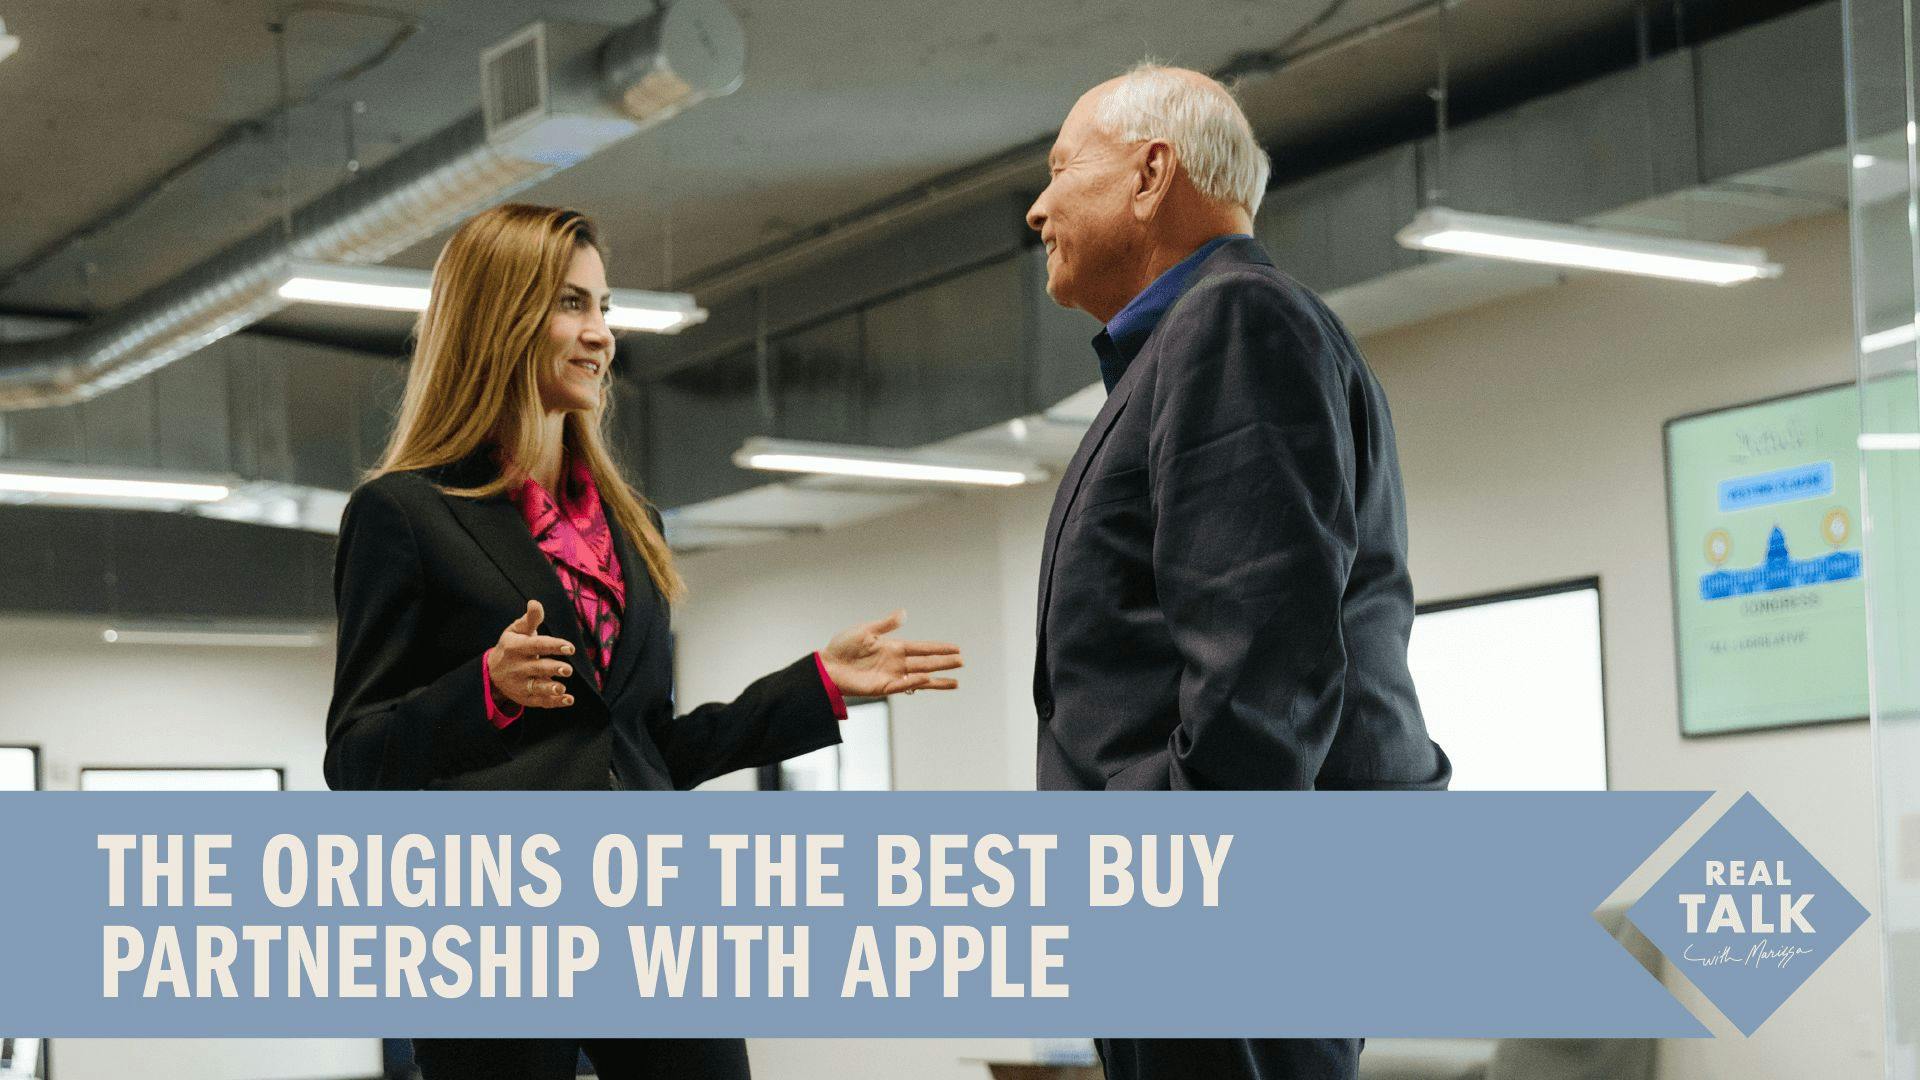 The Origins of the Best Buy Partnership with Apple